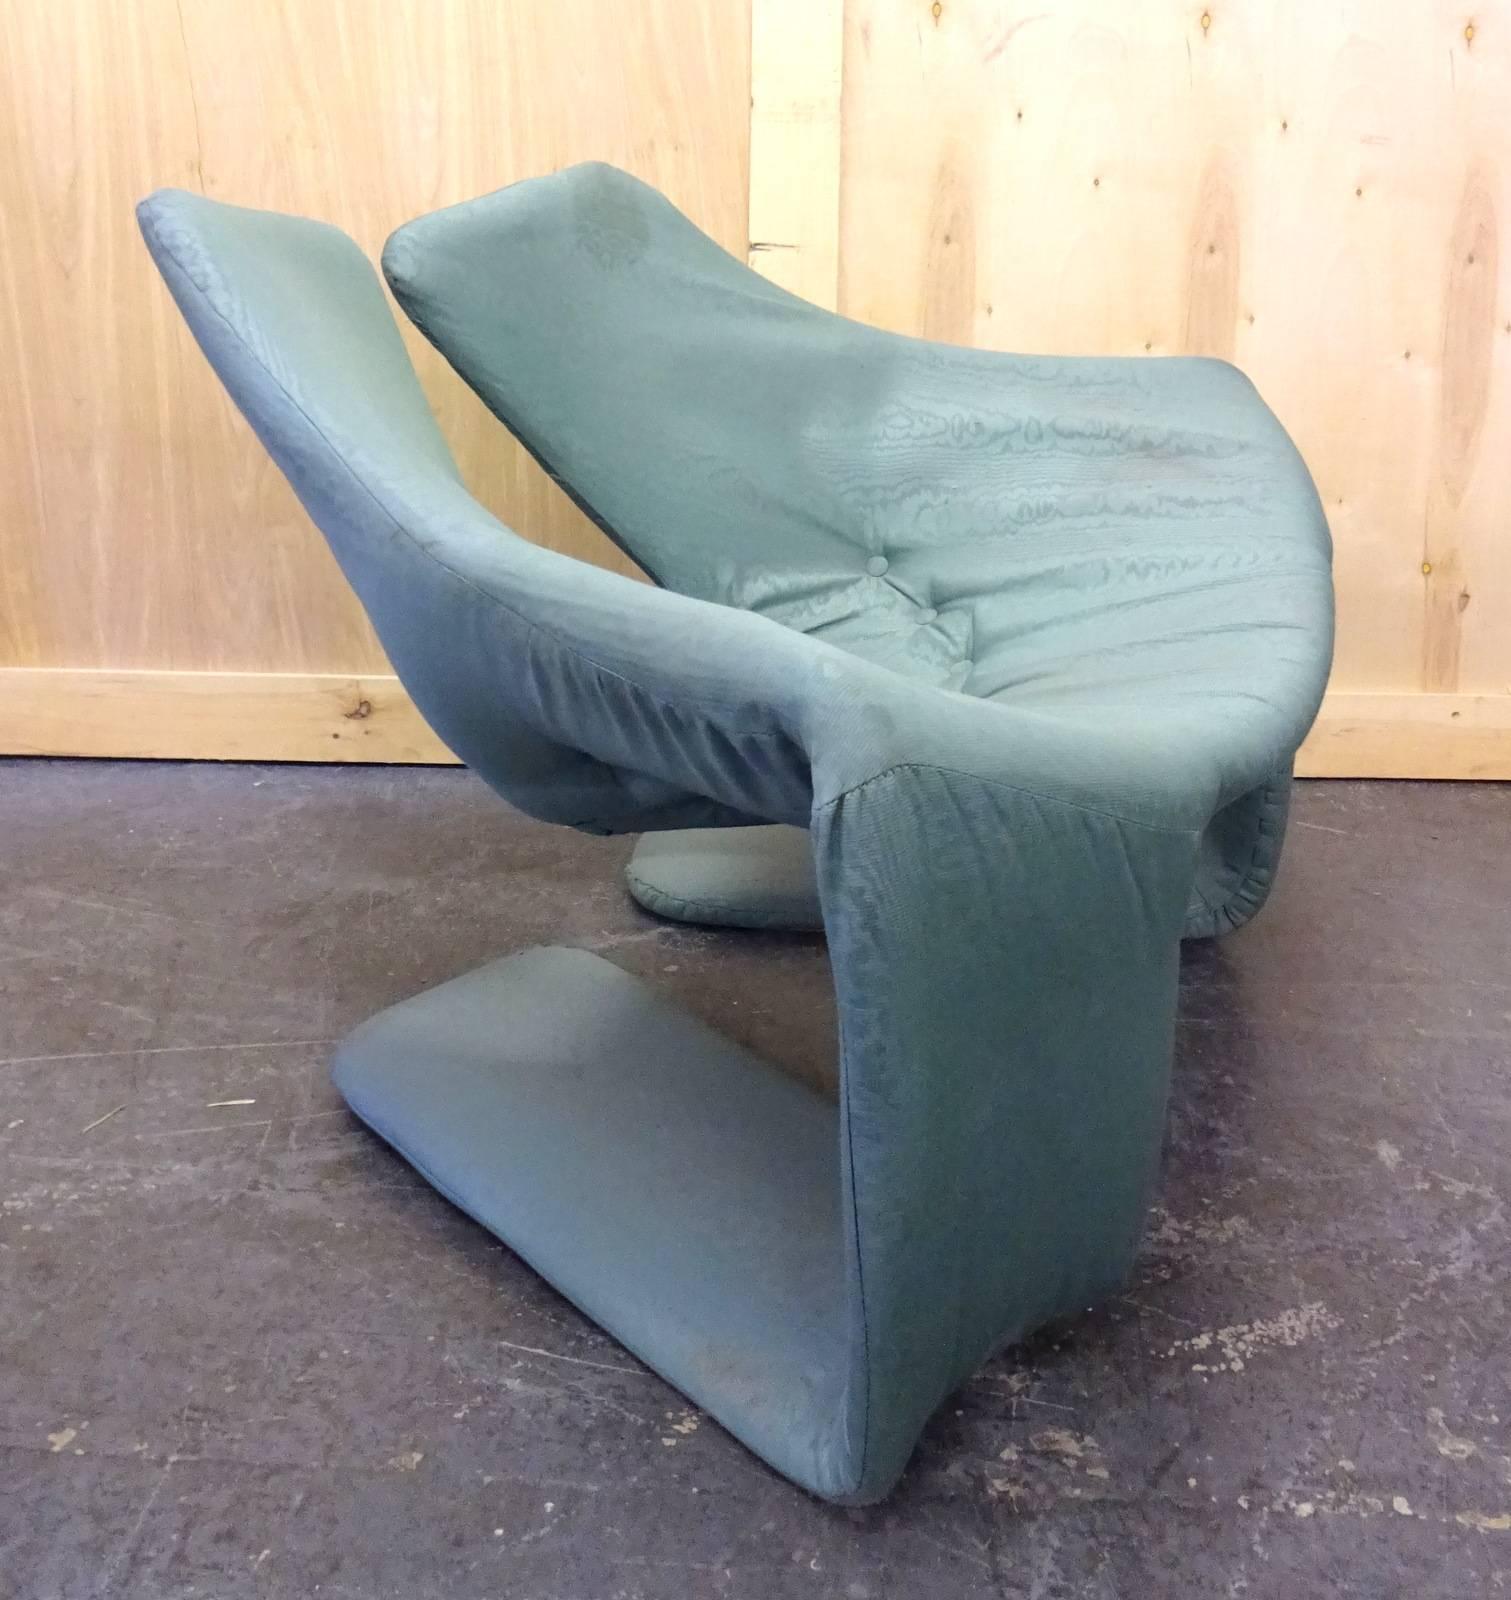 Zen chair designed by Kwok Hoi Chan for Steiner Paris in the 1970s
Very comfortable chair 
Located in Brooklyn.